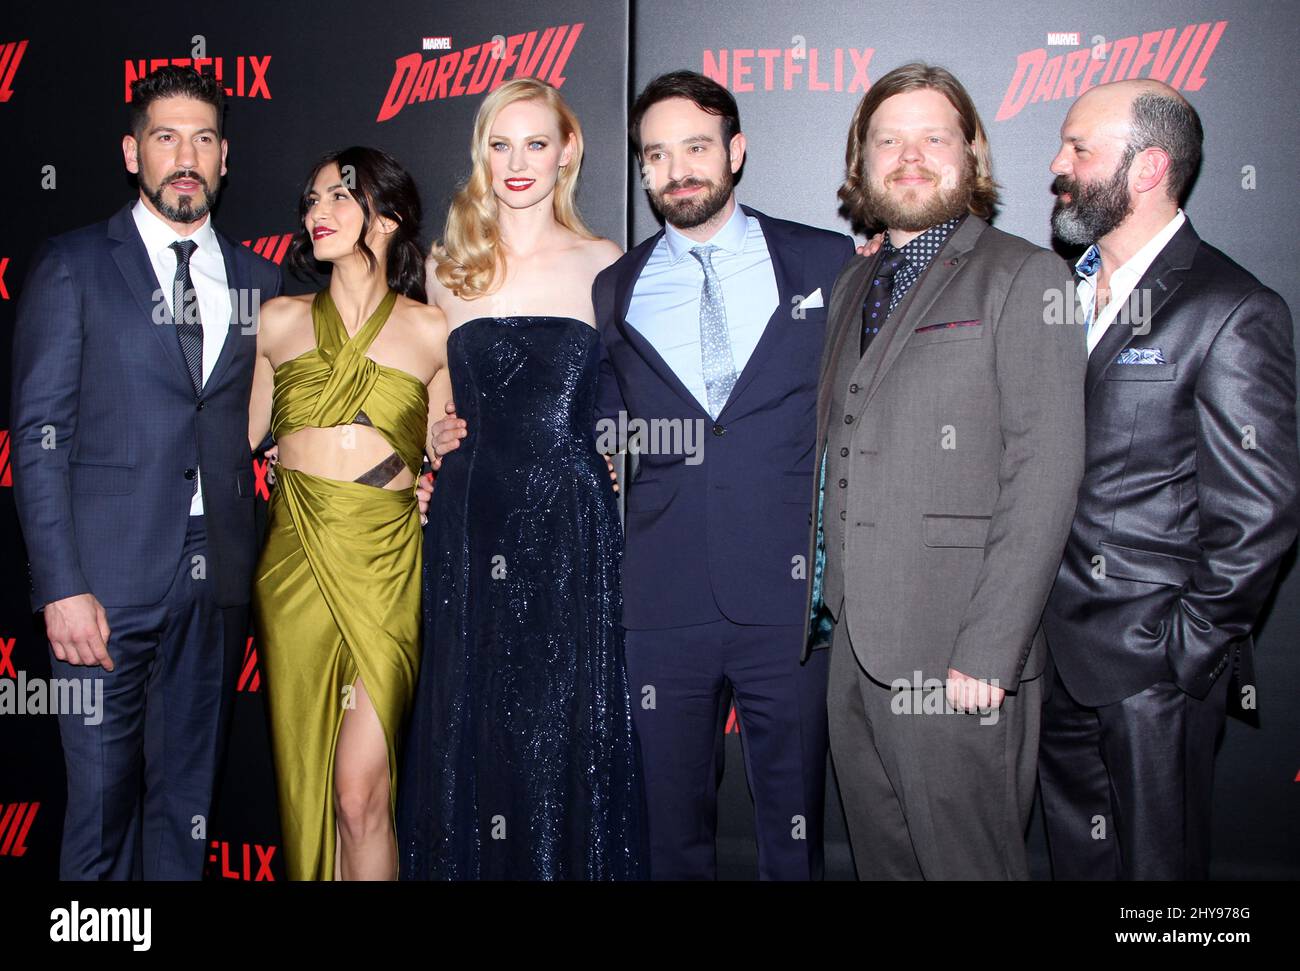 Deborah Ann Woll, Charlie Cox, Elden Henson and Geoffrey Cantor 'Daredevil' Season 2 Premiere Held at the AMC Loews Lincoln Square 13 on February 25, 2016. Stock Photo